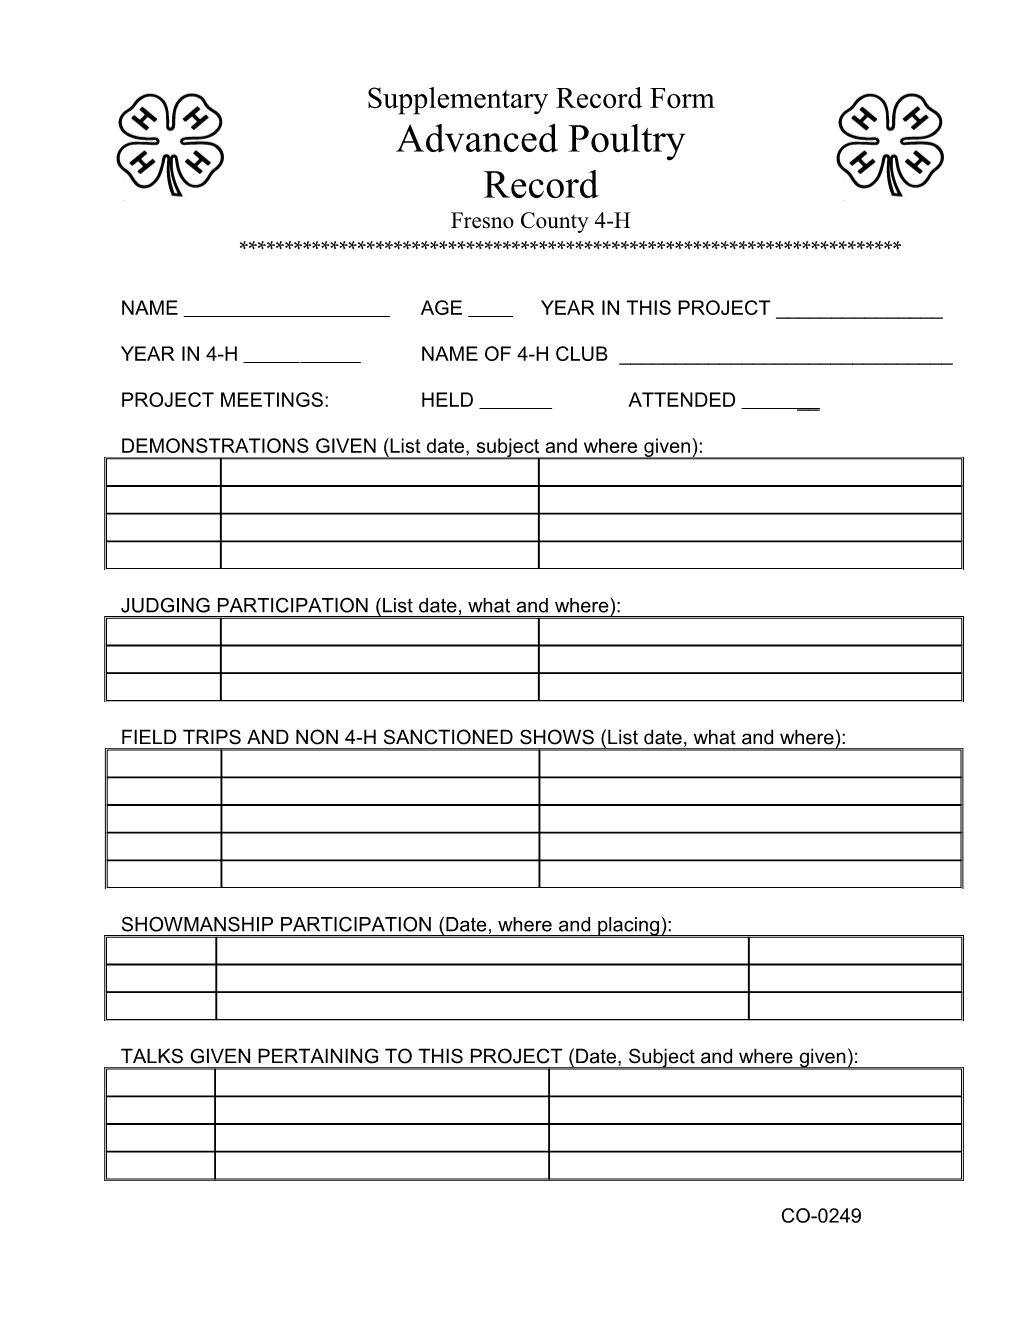 Supplementary Record Form